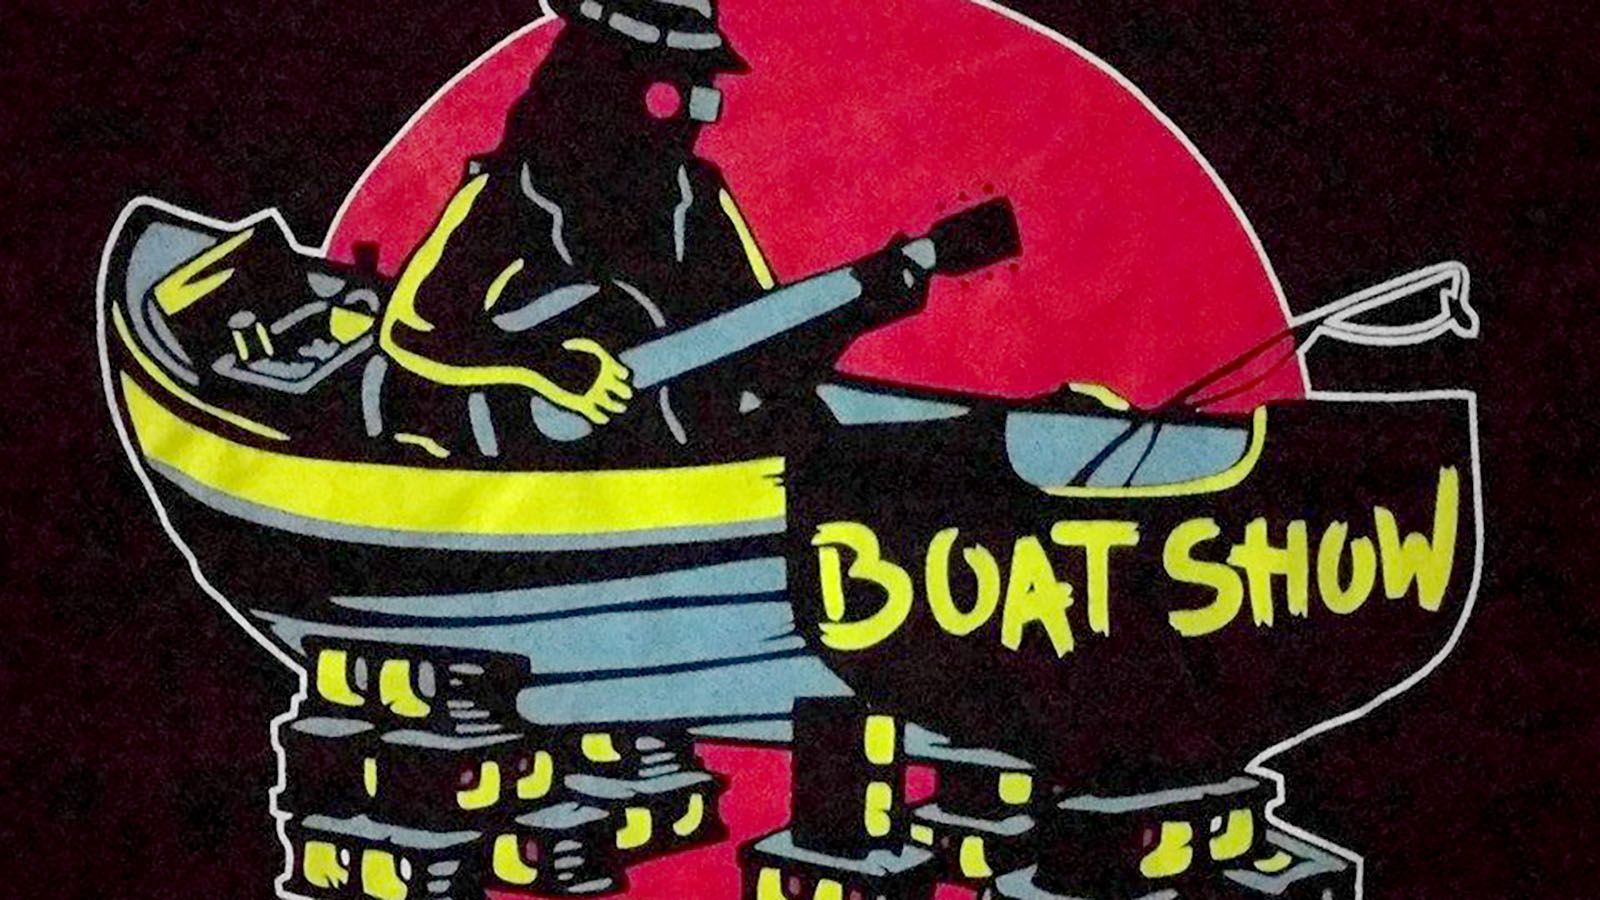 Boat Show will perform May 19 at The Brass Rail.